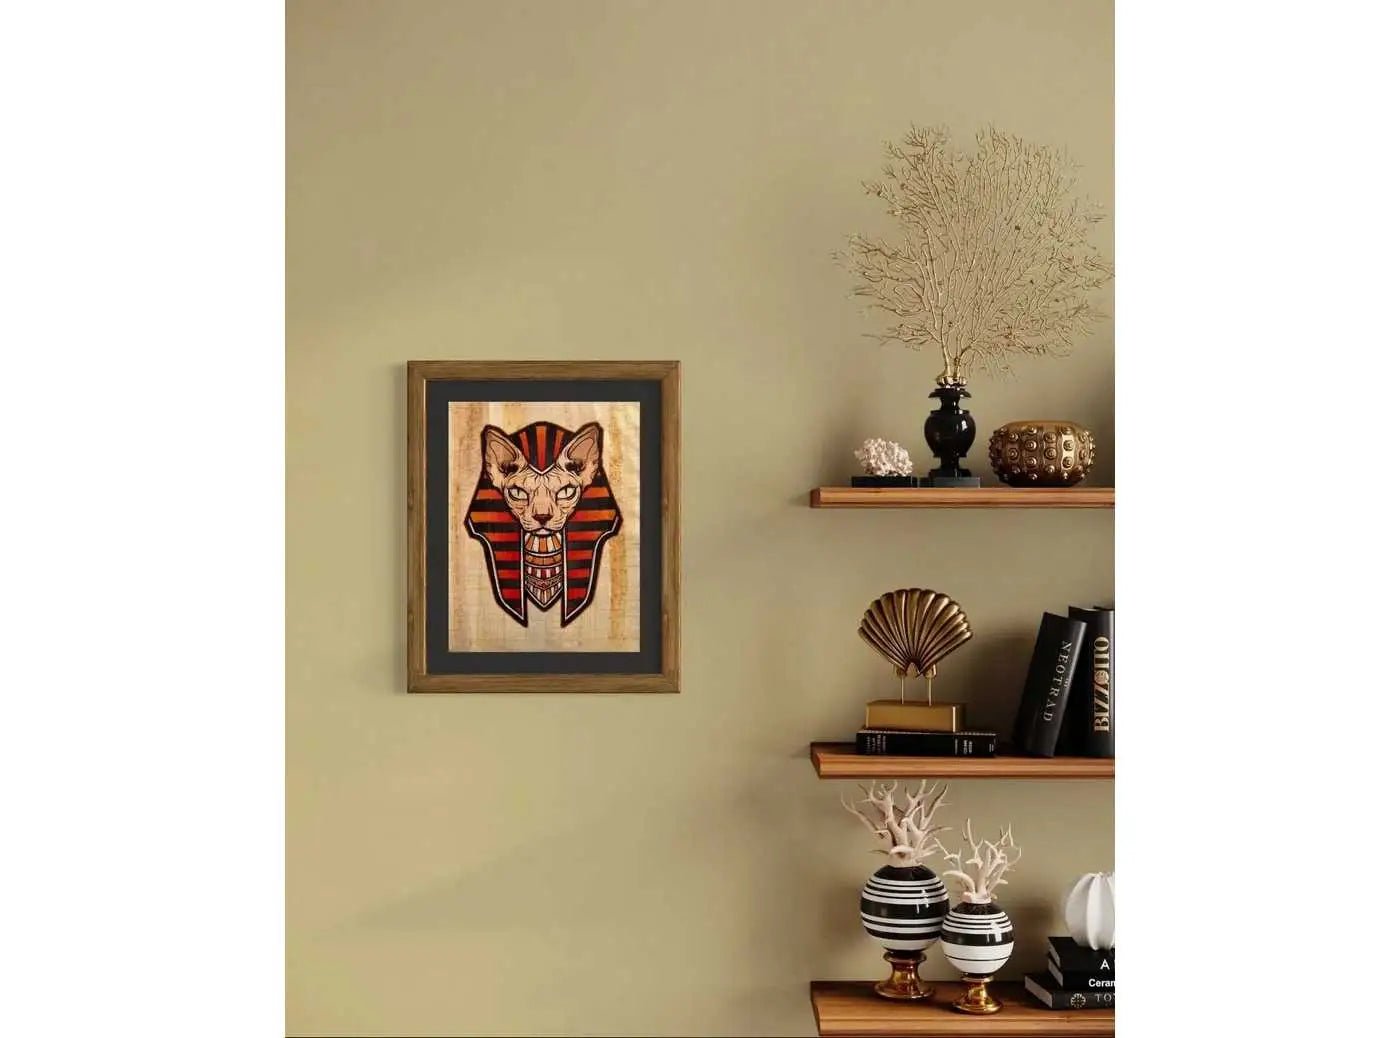 Sphynx Cat Egyptian Printing on Egyptian Vintage Papyrus - Gift for Canadian Sphynx Bast Lovers - Cat Wall Art Decor